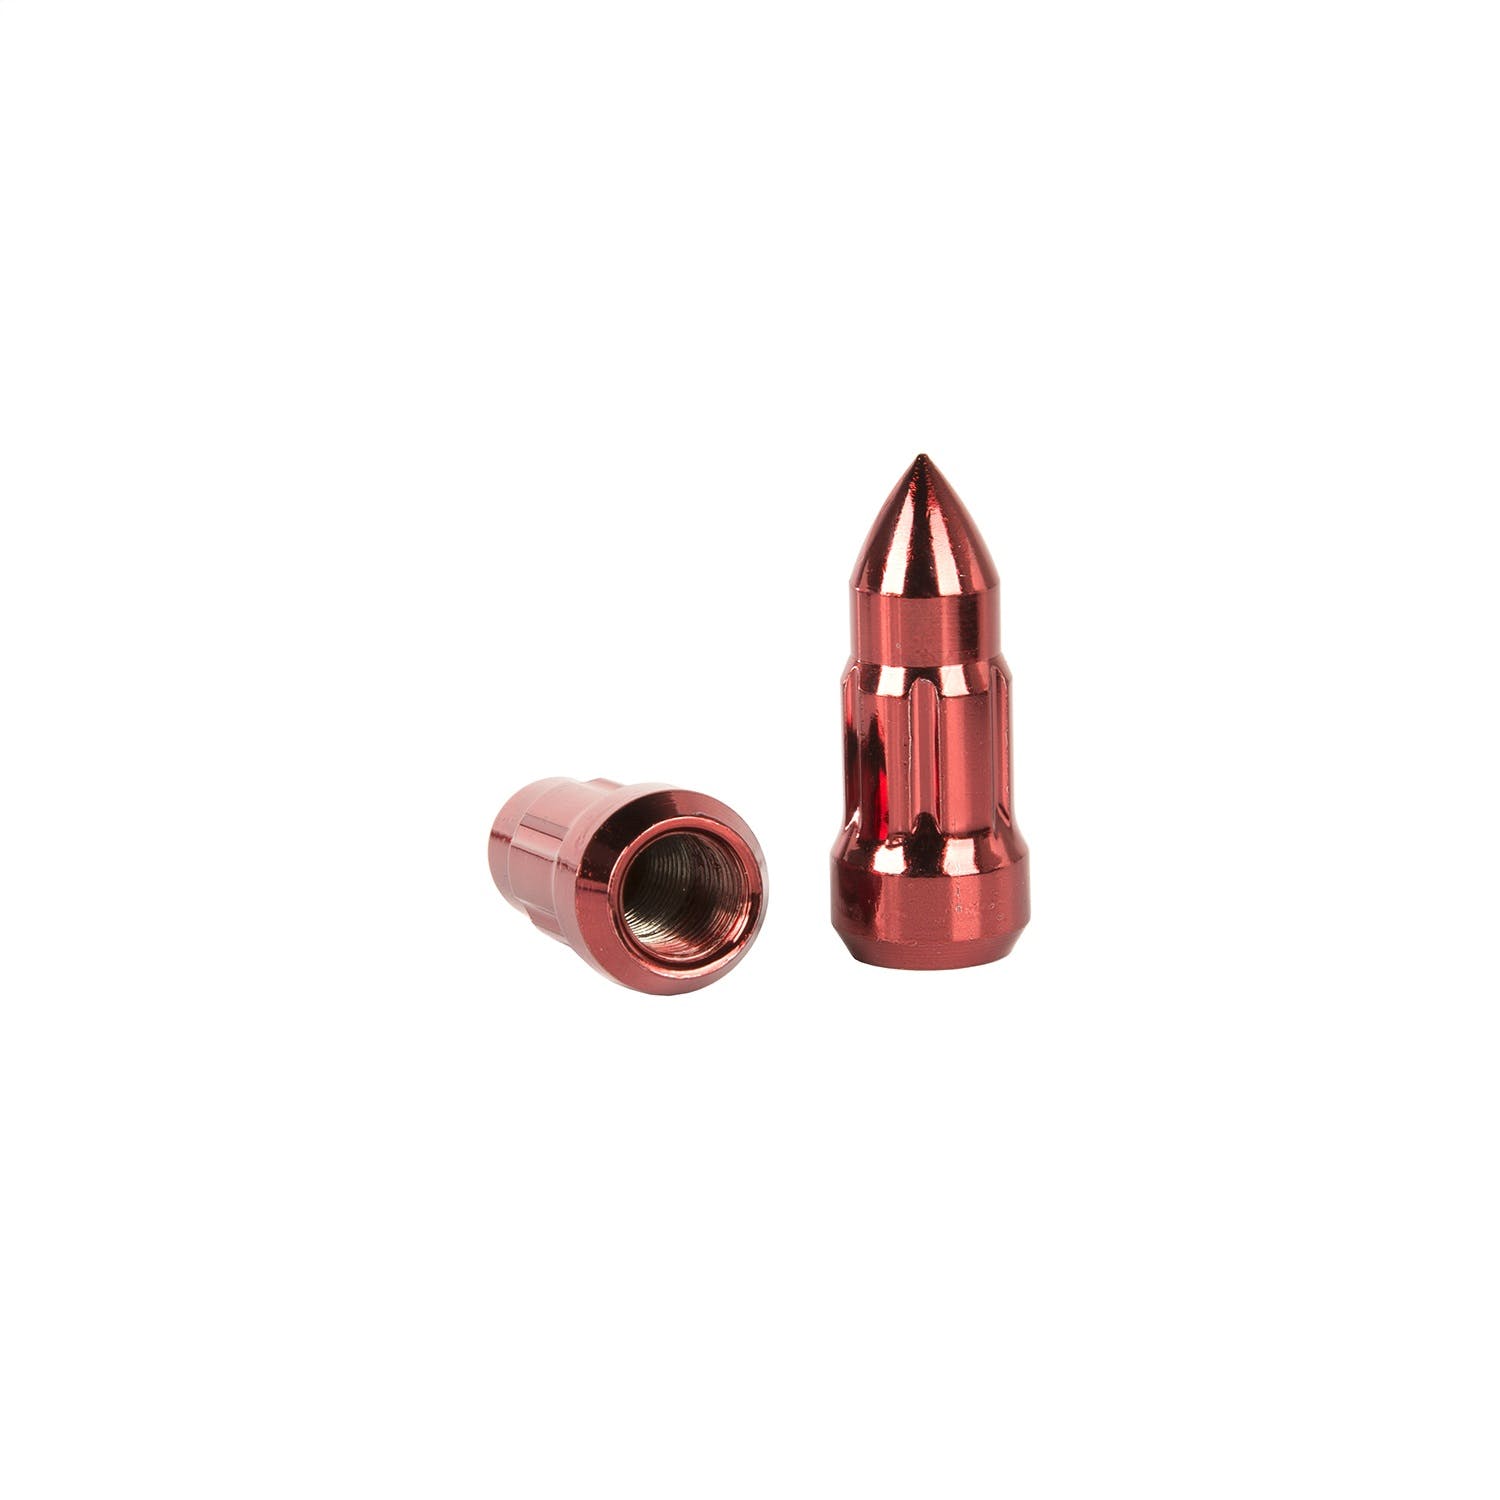 Alloy USA 11290 Lug, Bullet Style, Red, 23pc, 1/2-20